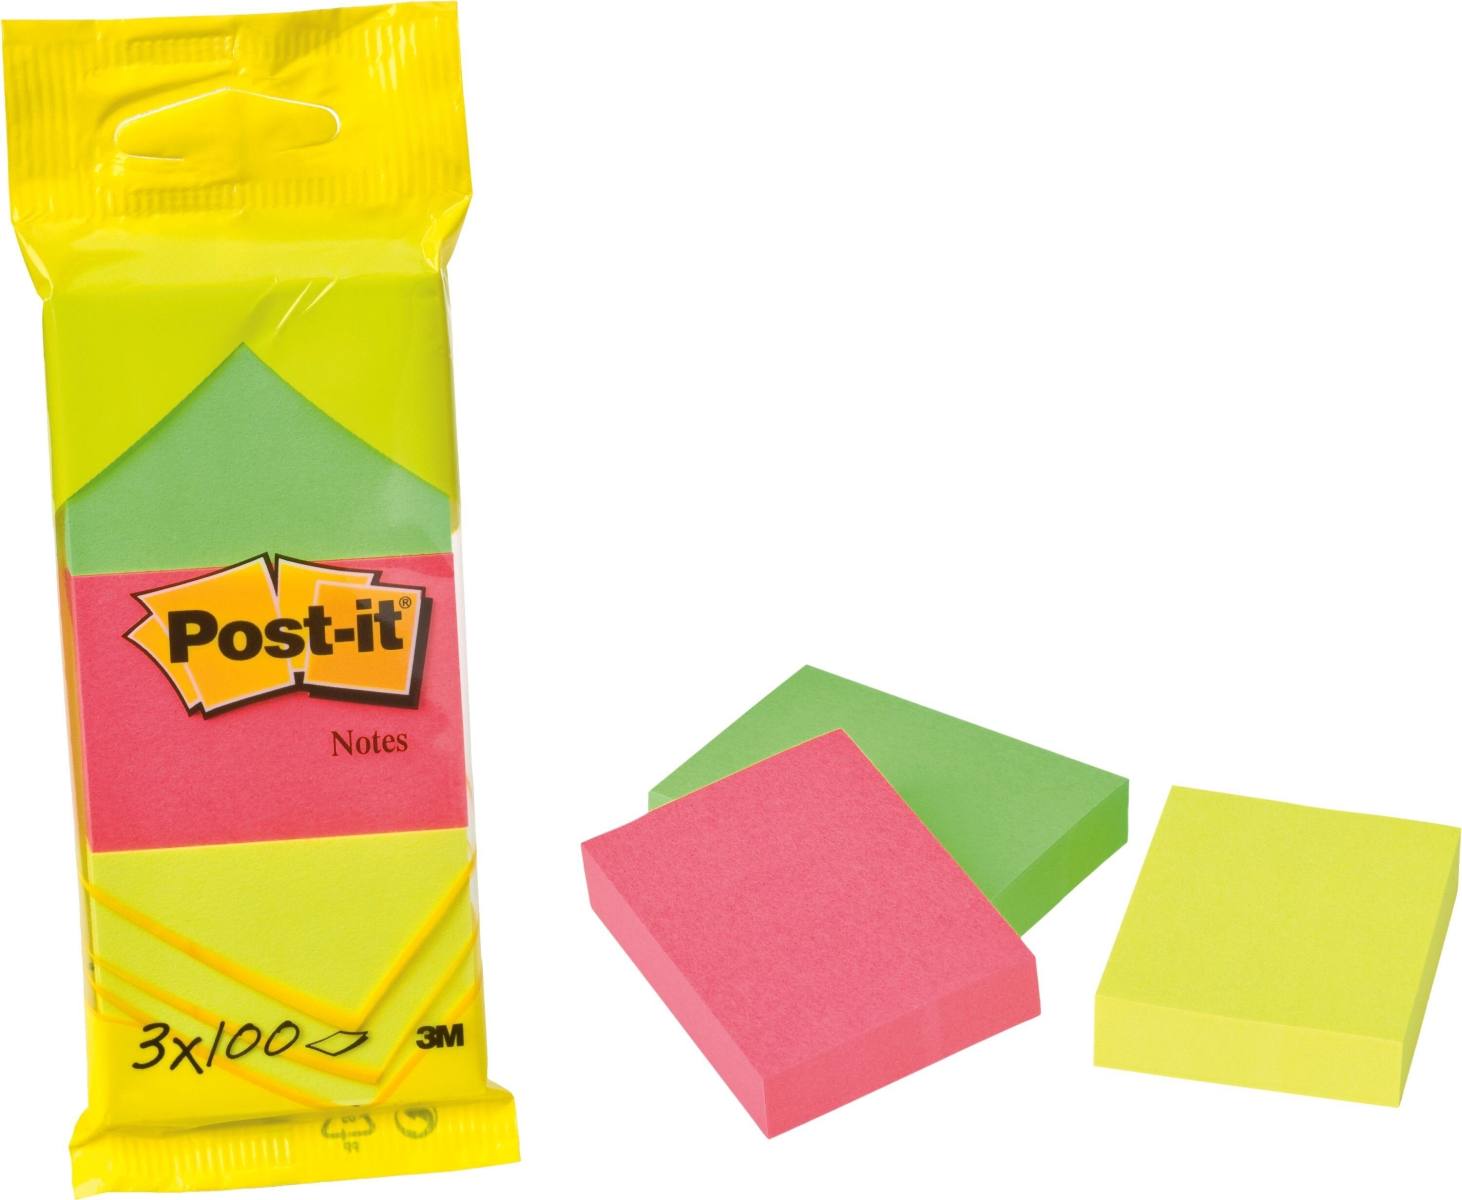 3M Post-it Notes 6812N, 38 mm x 51 mm, neon yellow, neon green, neon pink, 3 pads of 100 sheets each